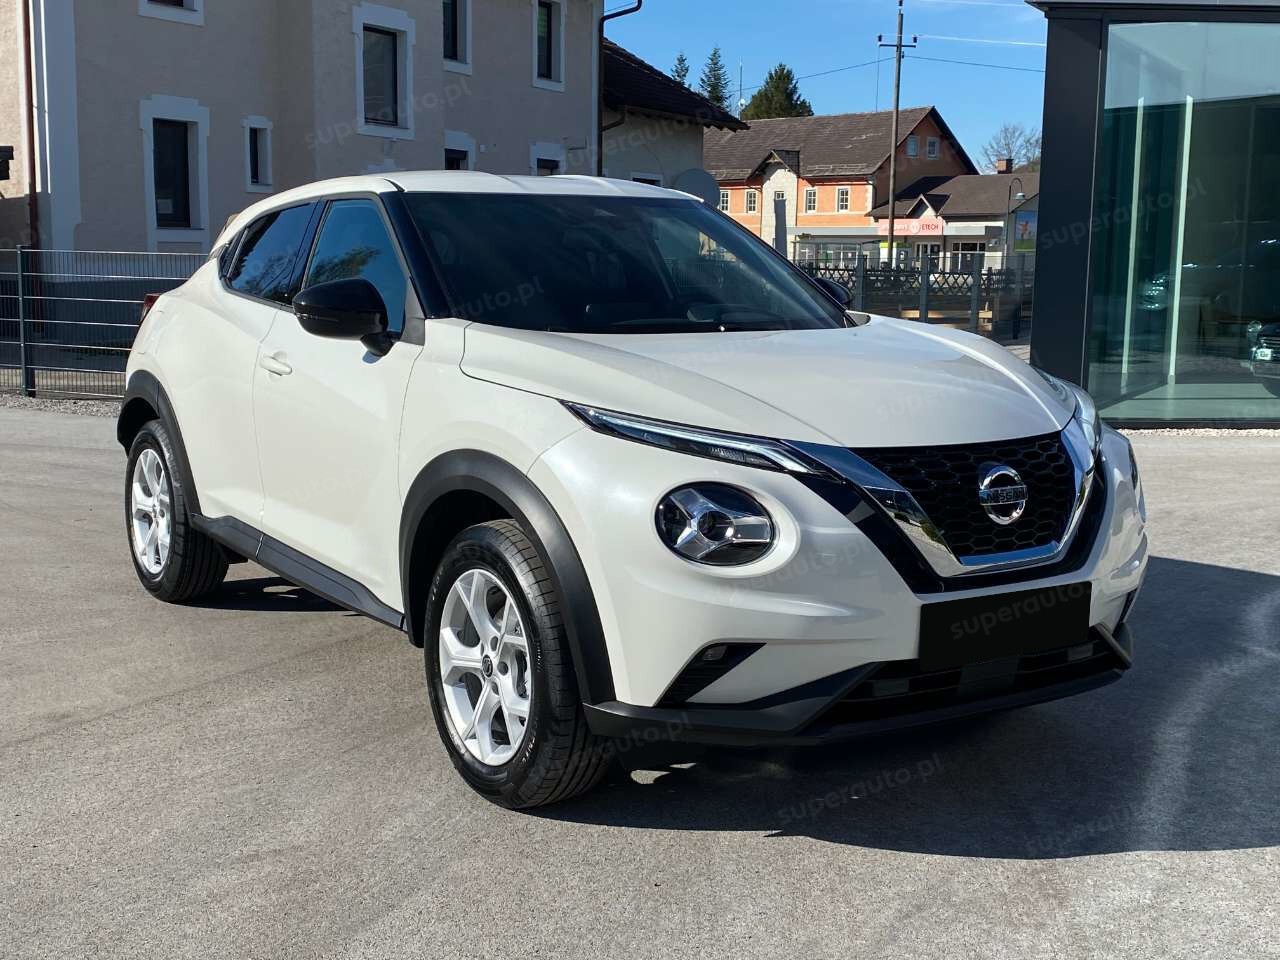 The oil capacity and type for a Nissan Juke